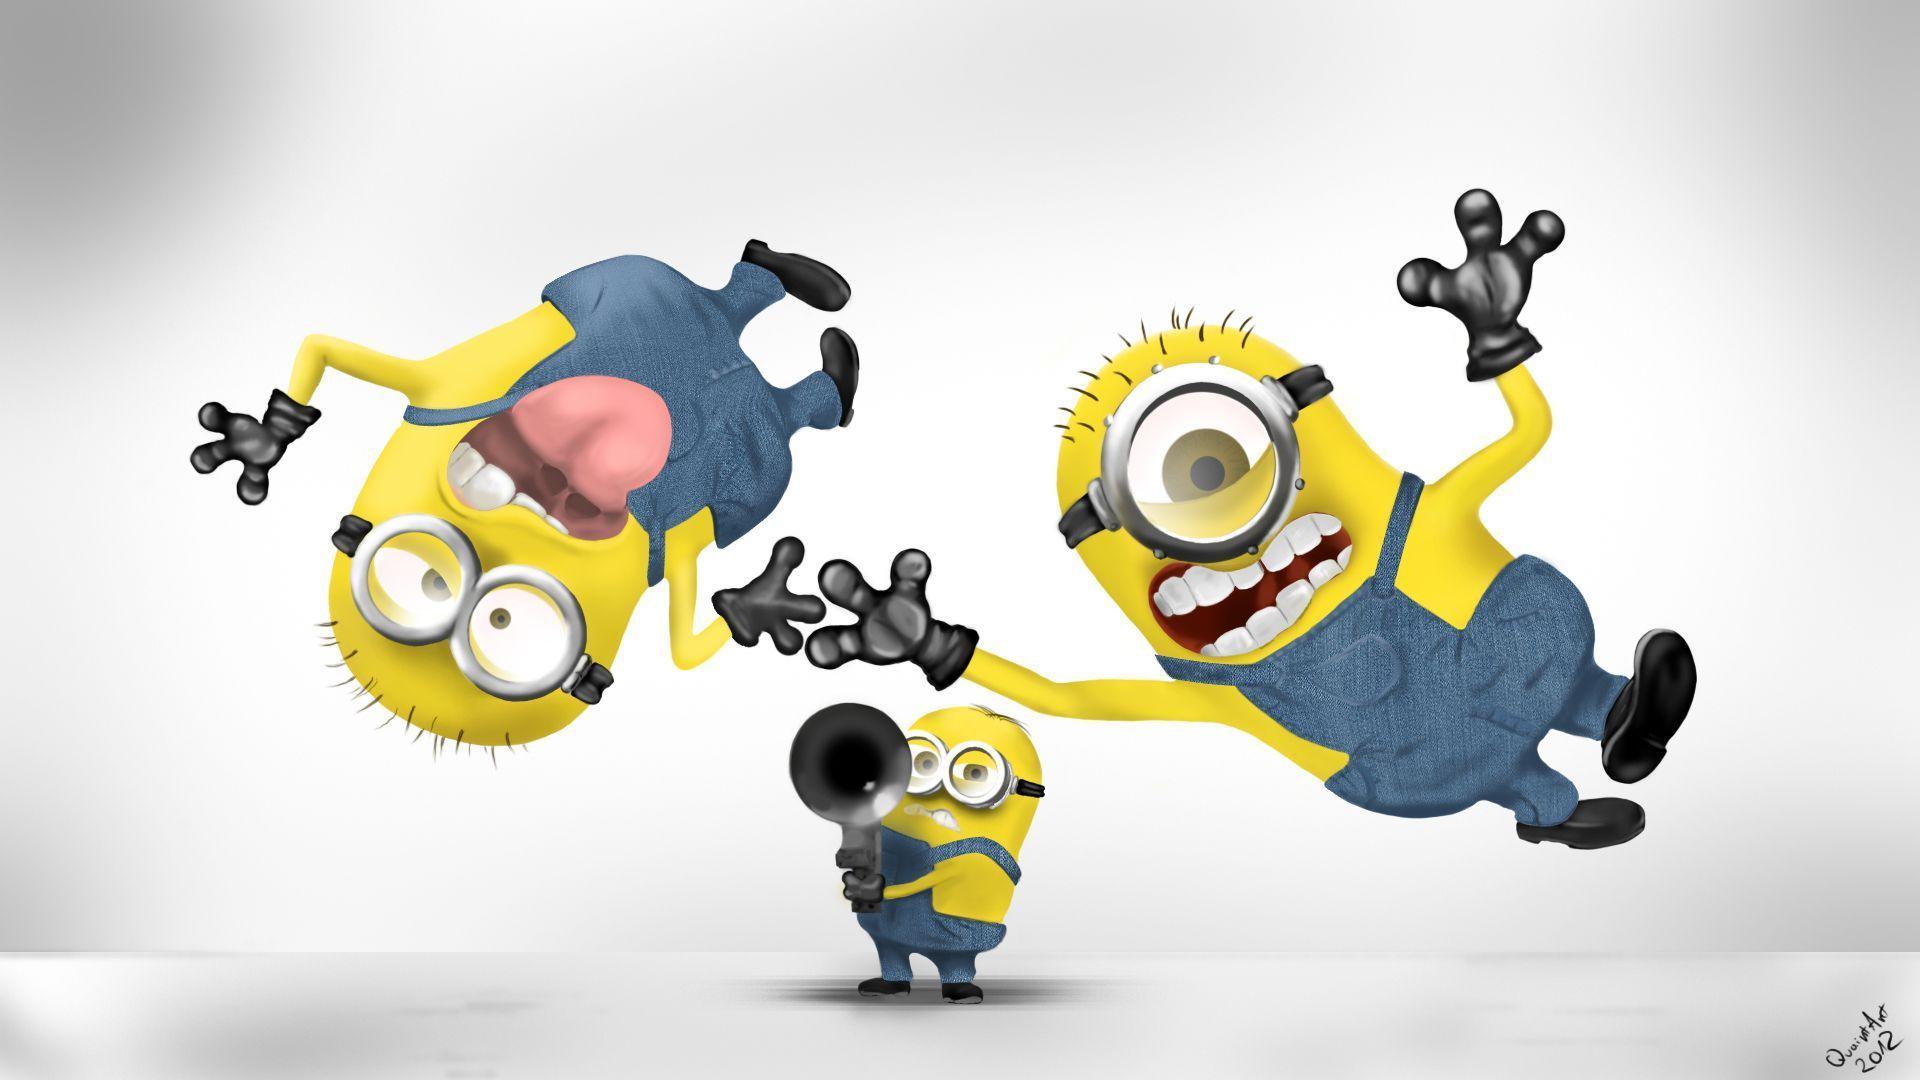 Funny Minions Despicable Me 2 Image Wallpaper Desktop Background Free